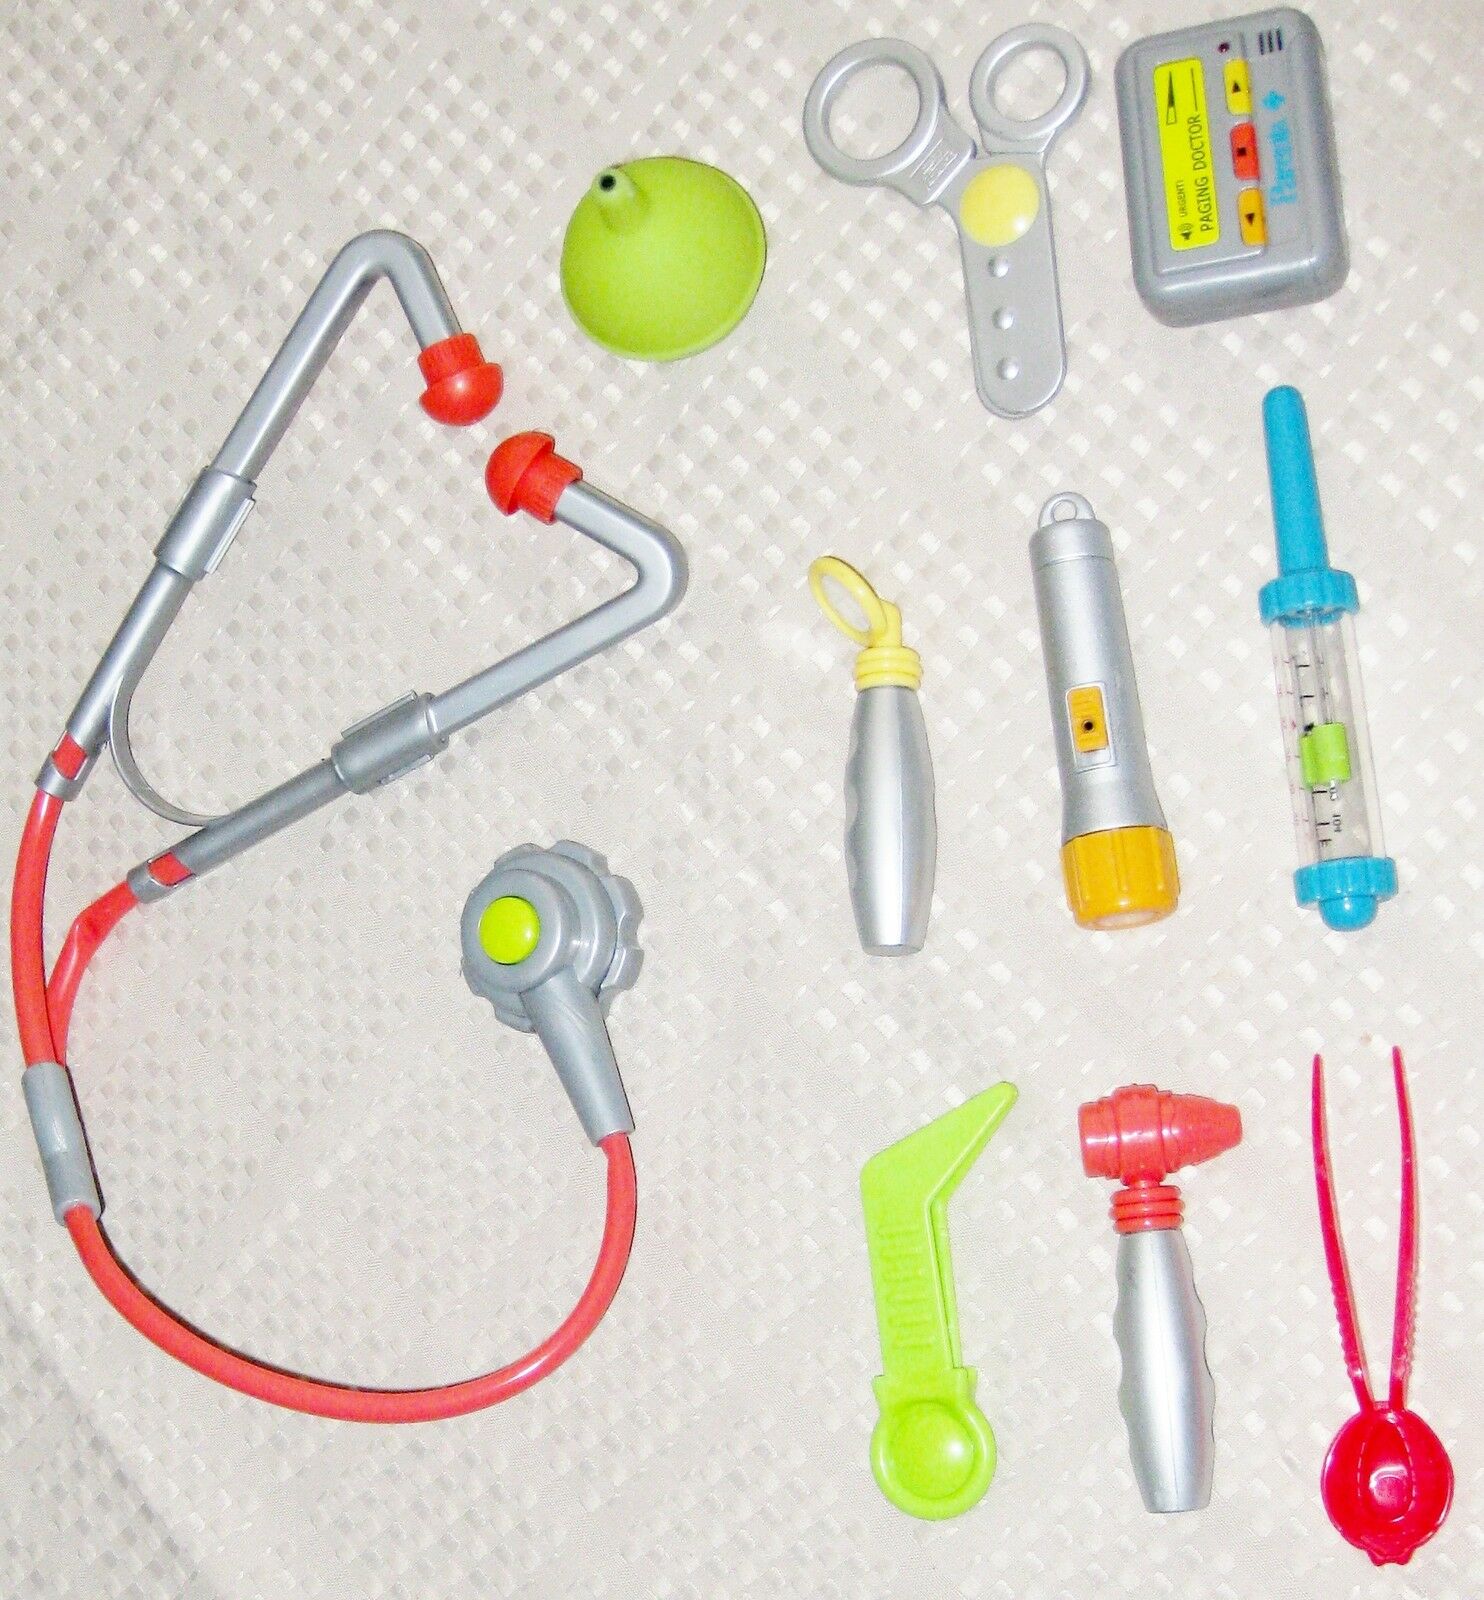 Beating Sounds Stethoscope - Dr Kit With Accessories Toy - 10 Pieces